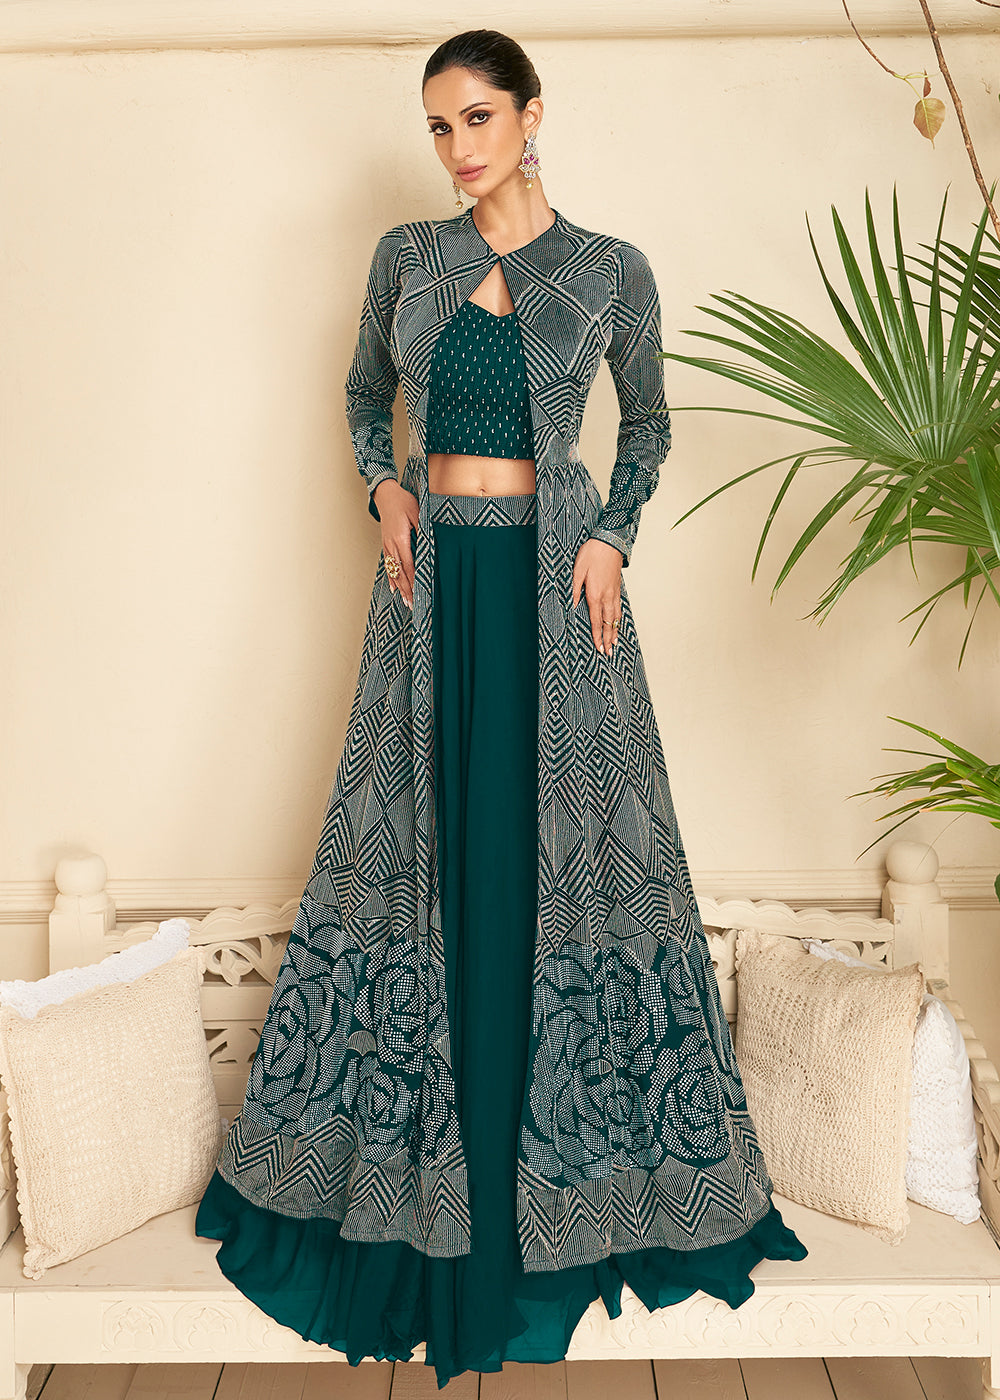 Buy Now Teal Green Jacket Style Wedding Party Lehenga Skirt Suit Online in USA, UK, Canada & Worldwide at Empress Clothing.